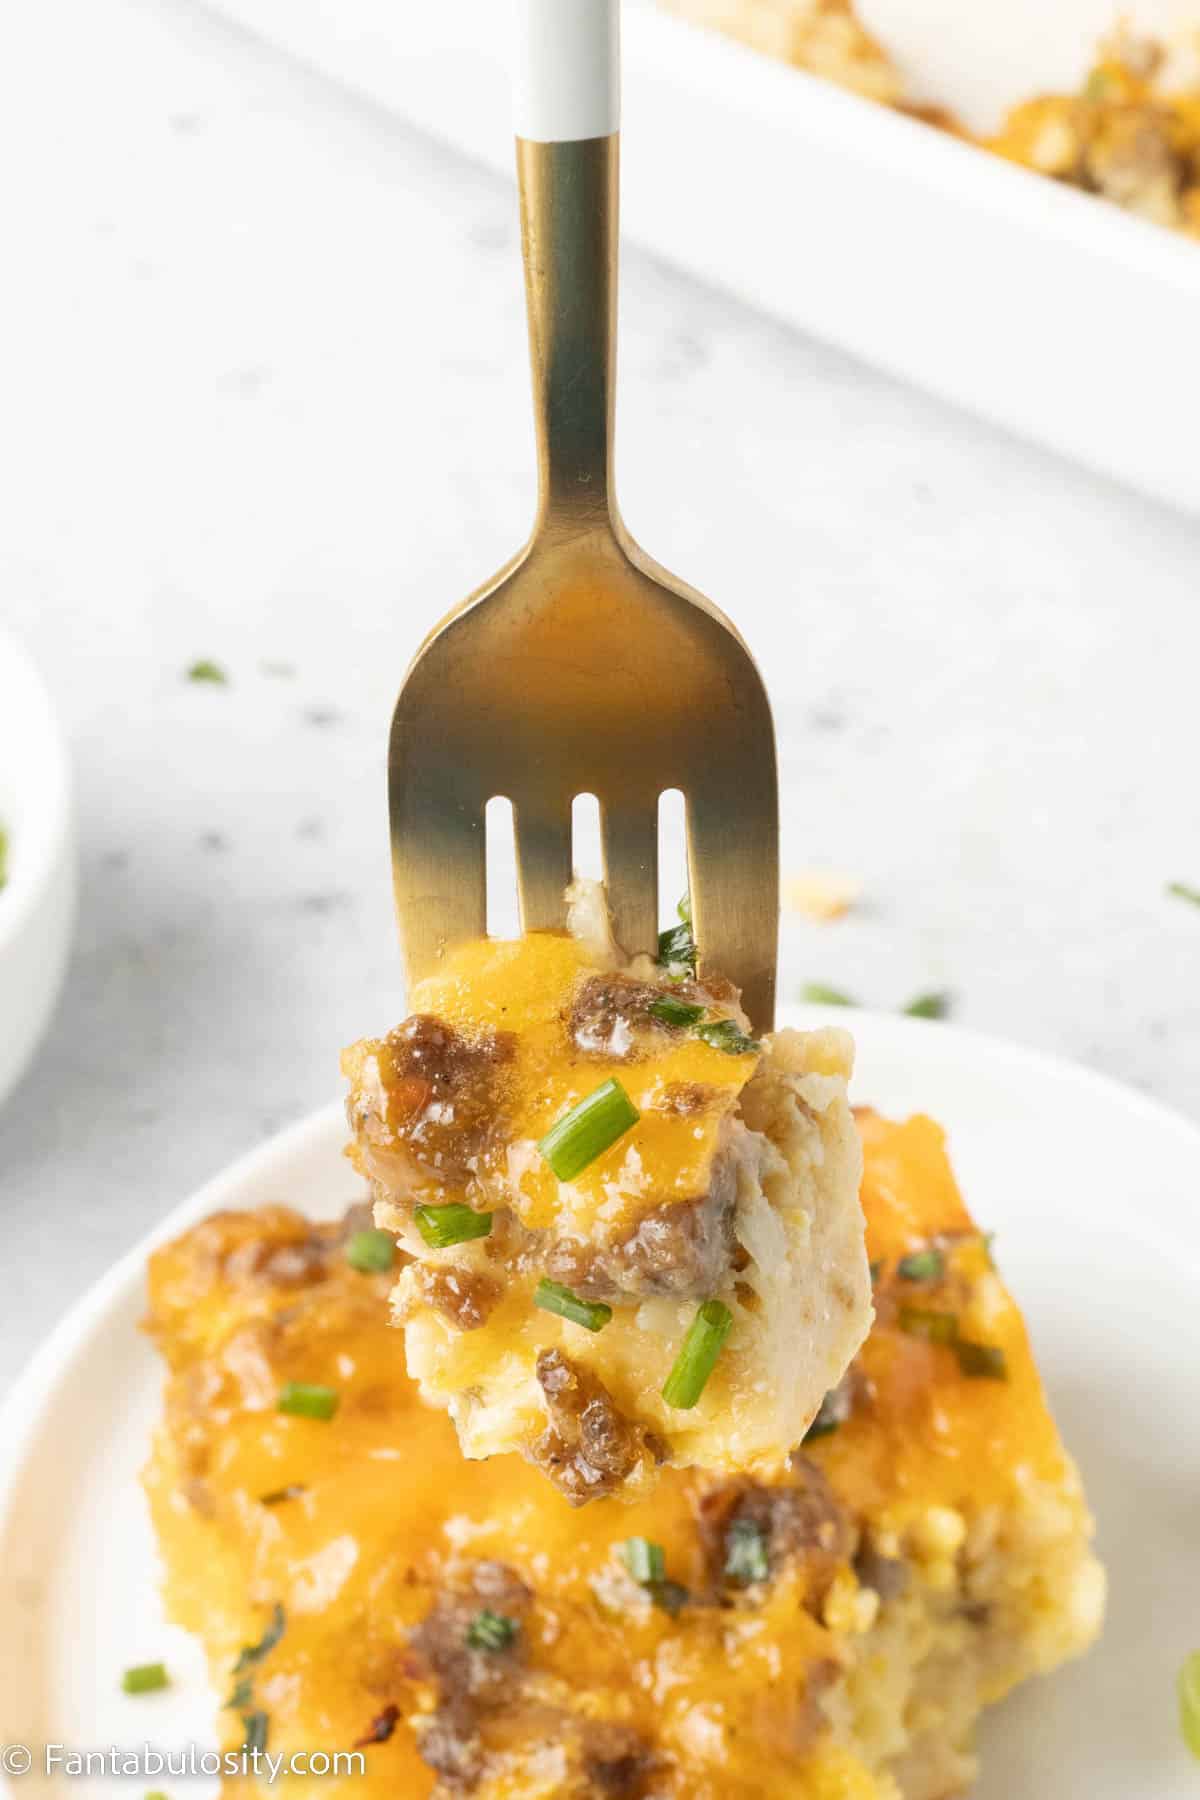 Bite of sausage and egg casserole on fork